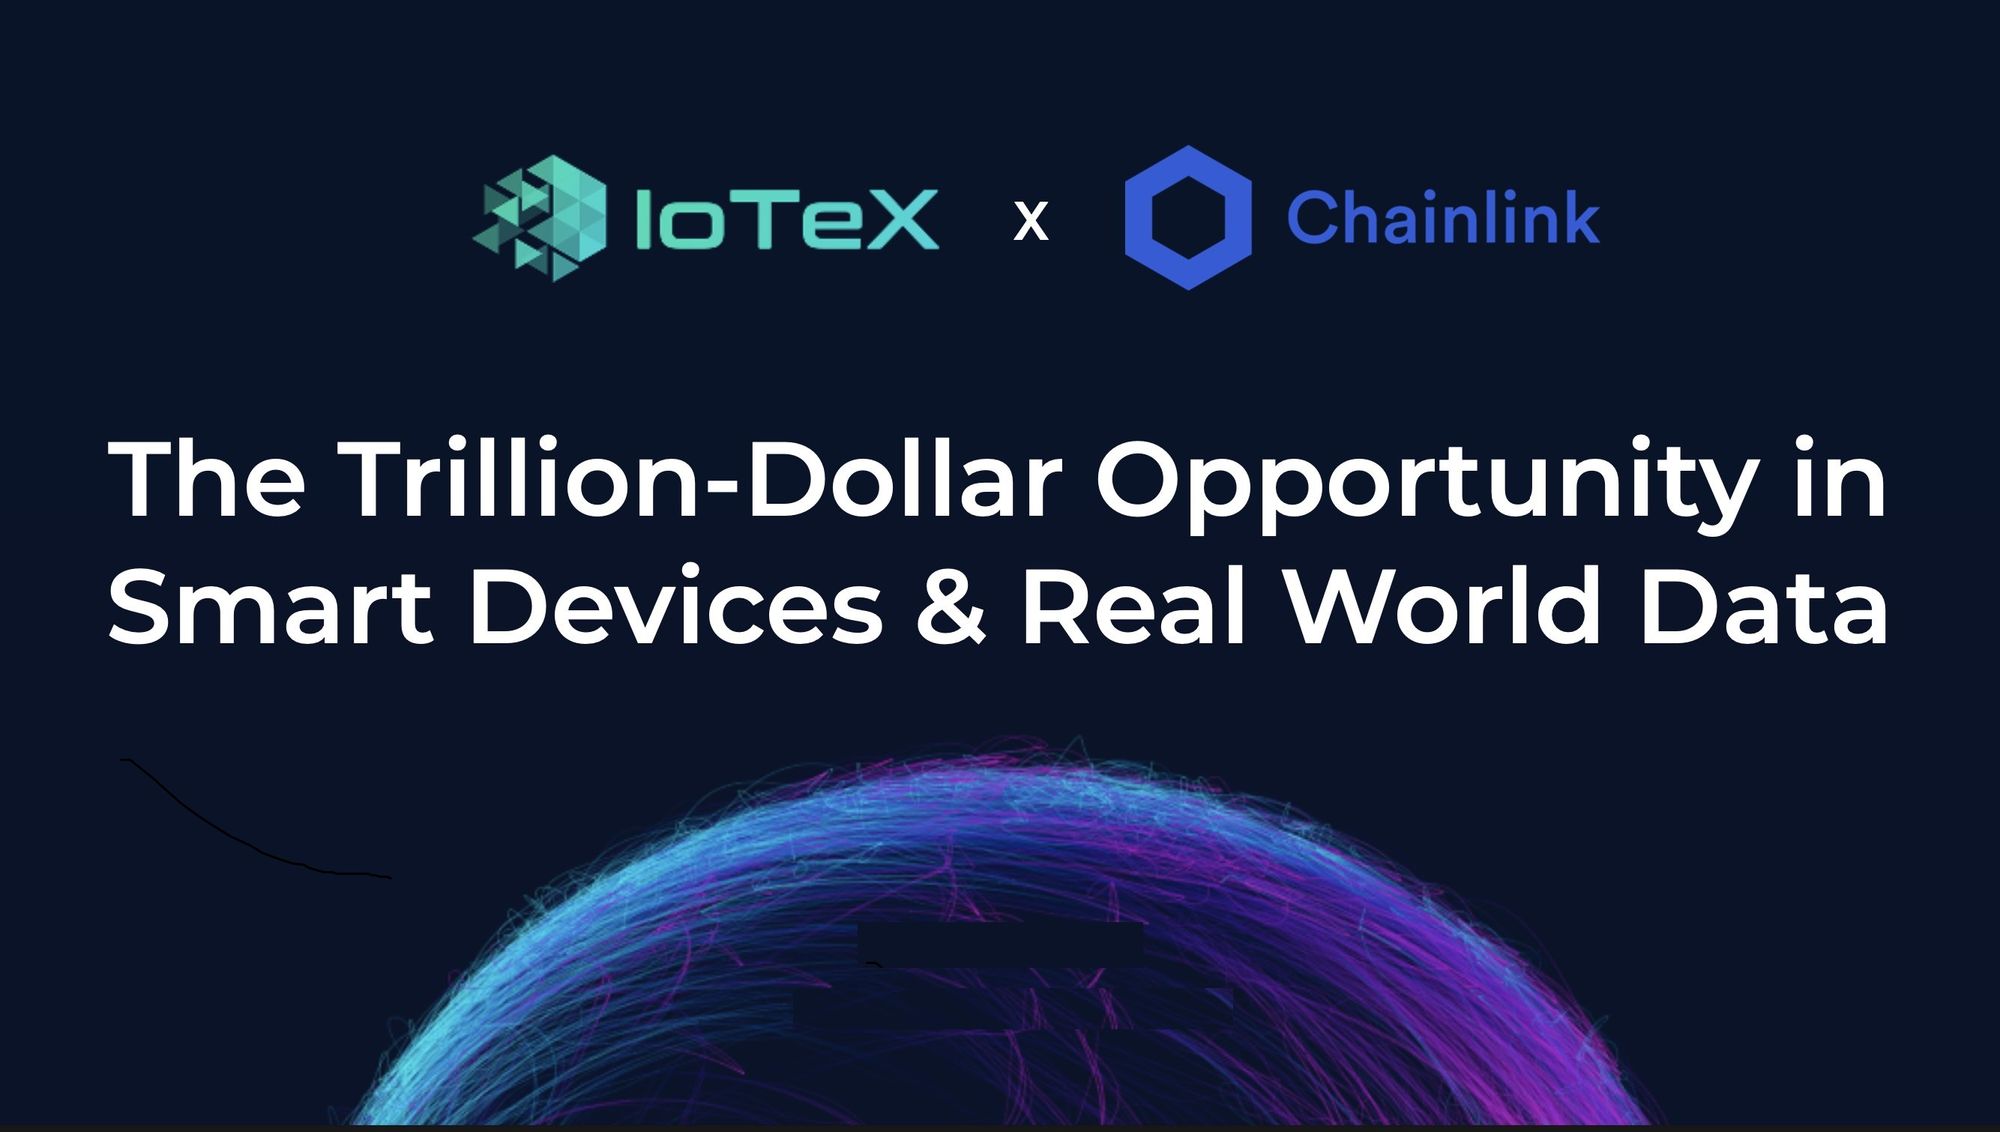 IoTeX + Chainlink [Exploring the Trillion Dollar Device Ecosystem]